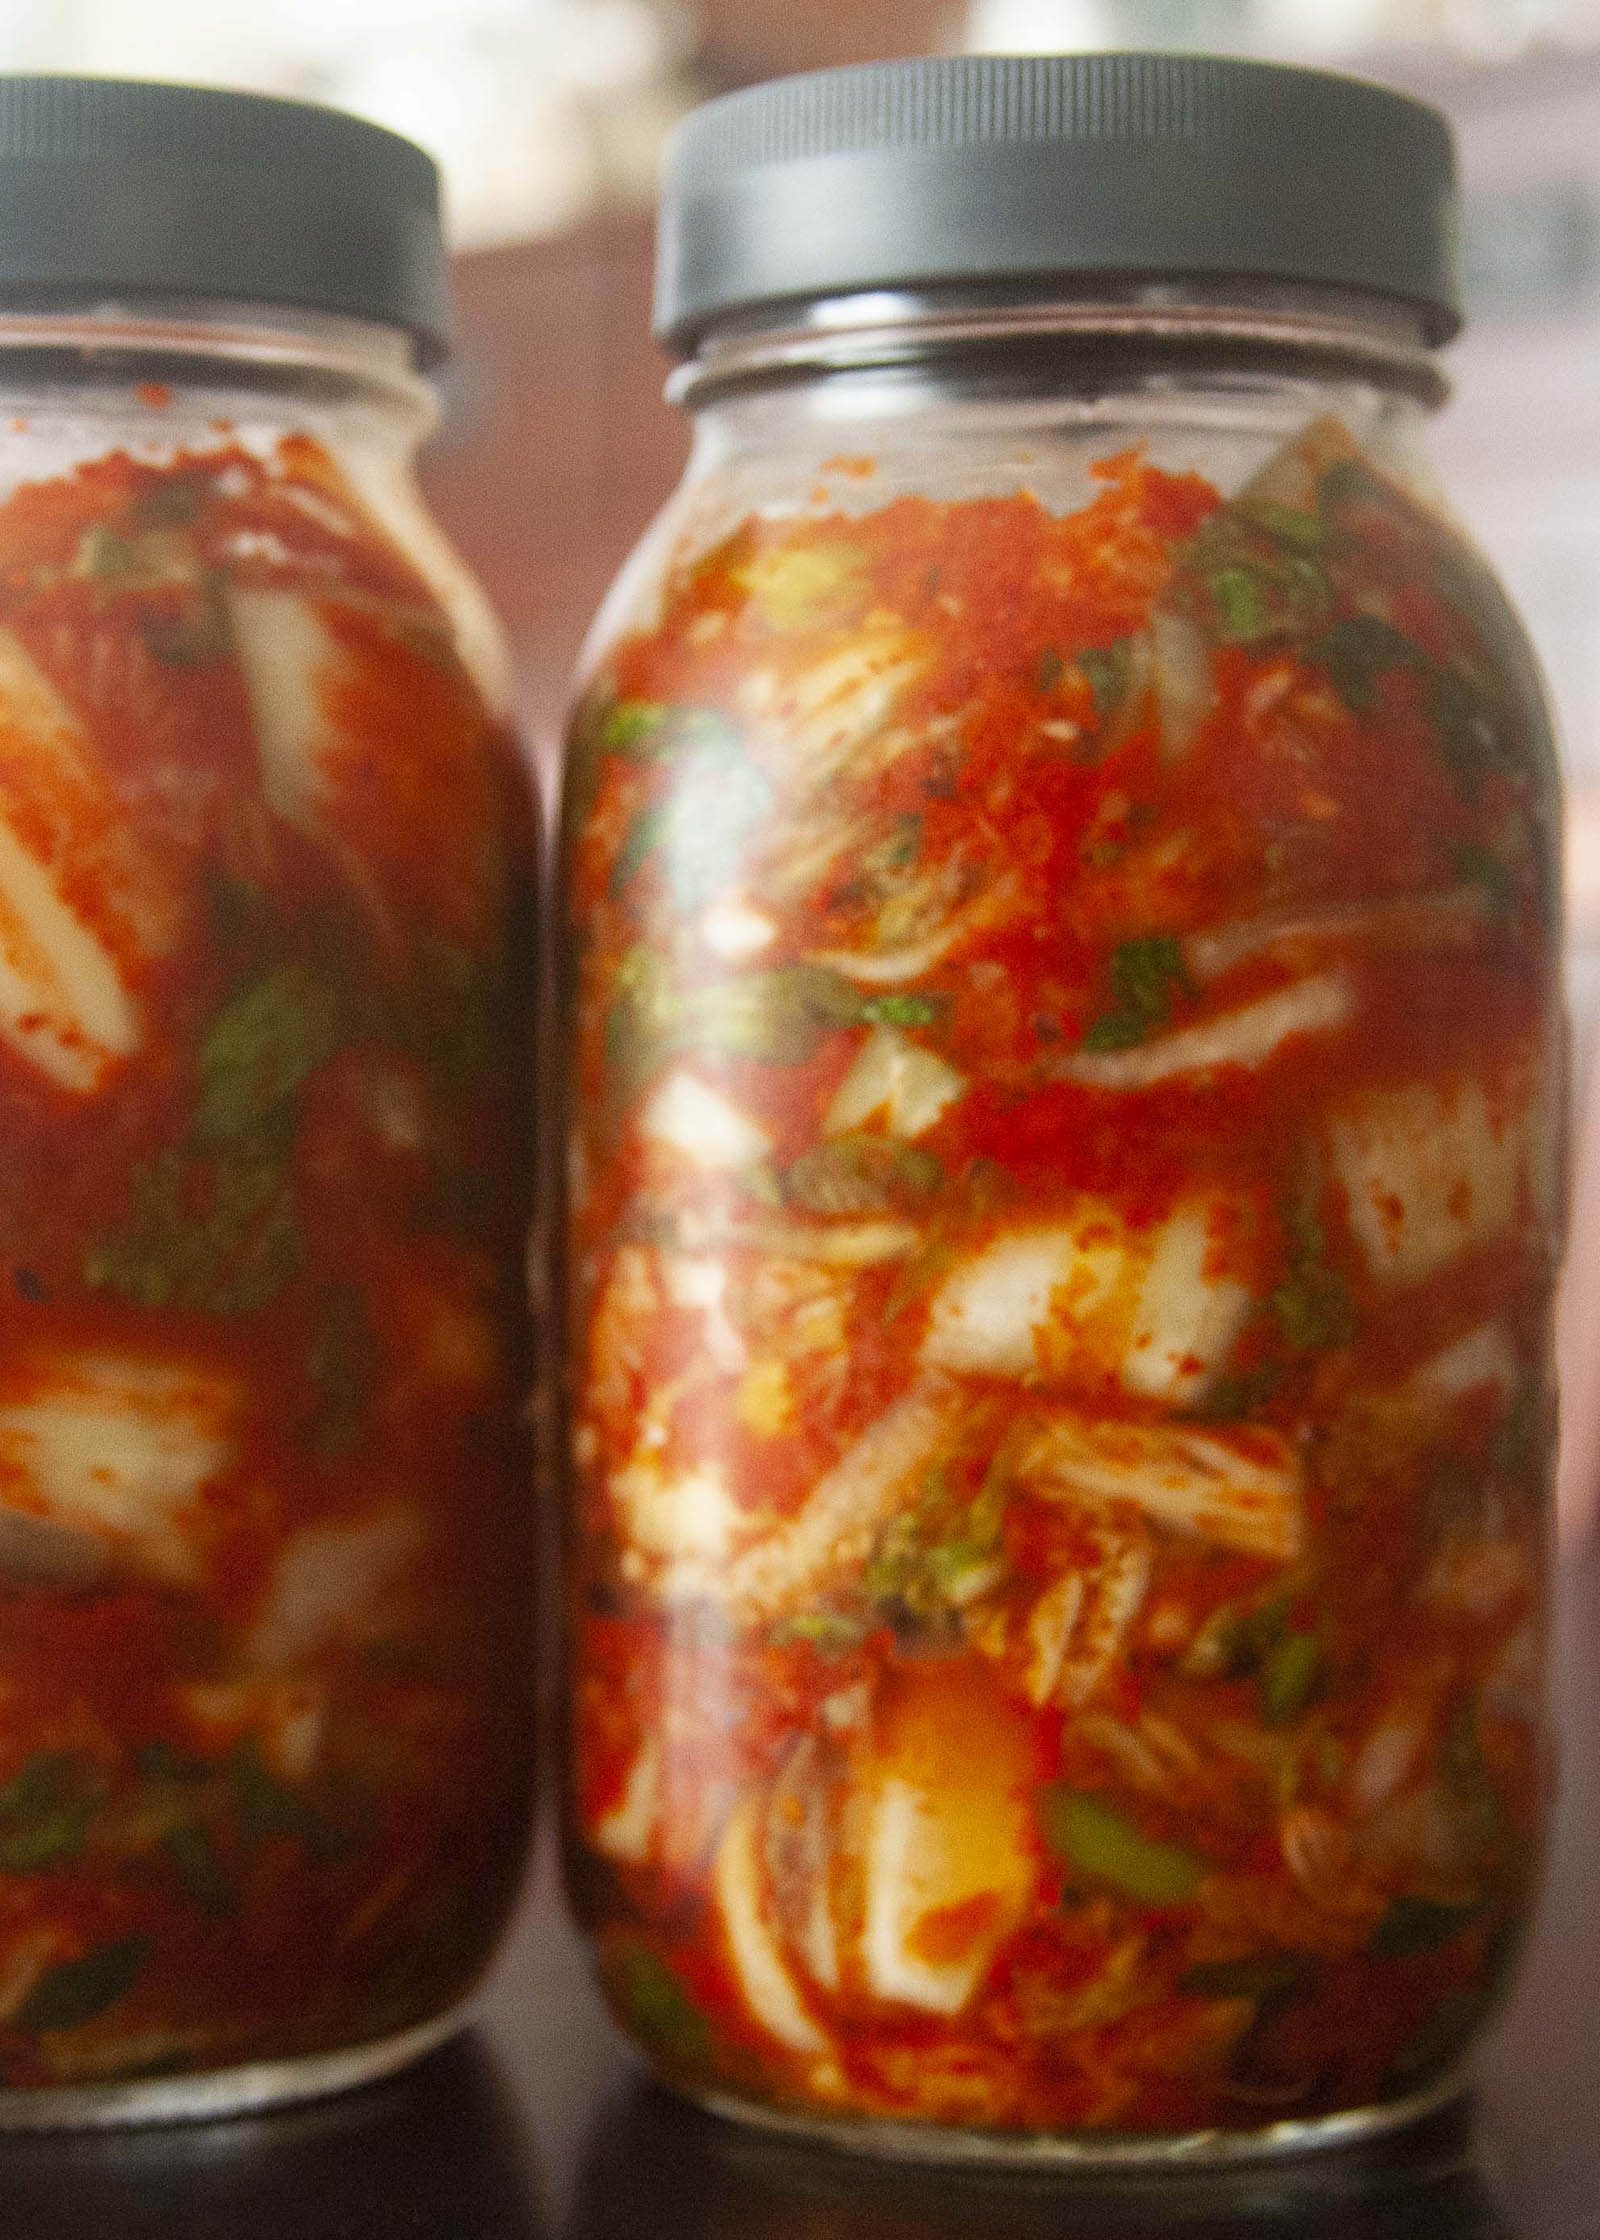 Half gallon jars filled with easy homemade kimchi.